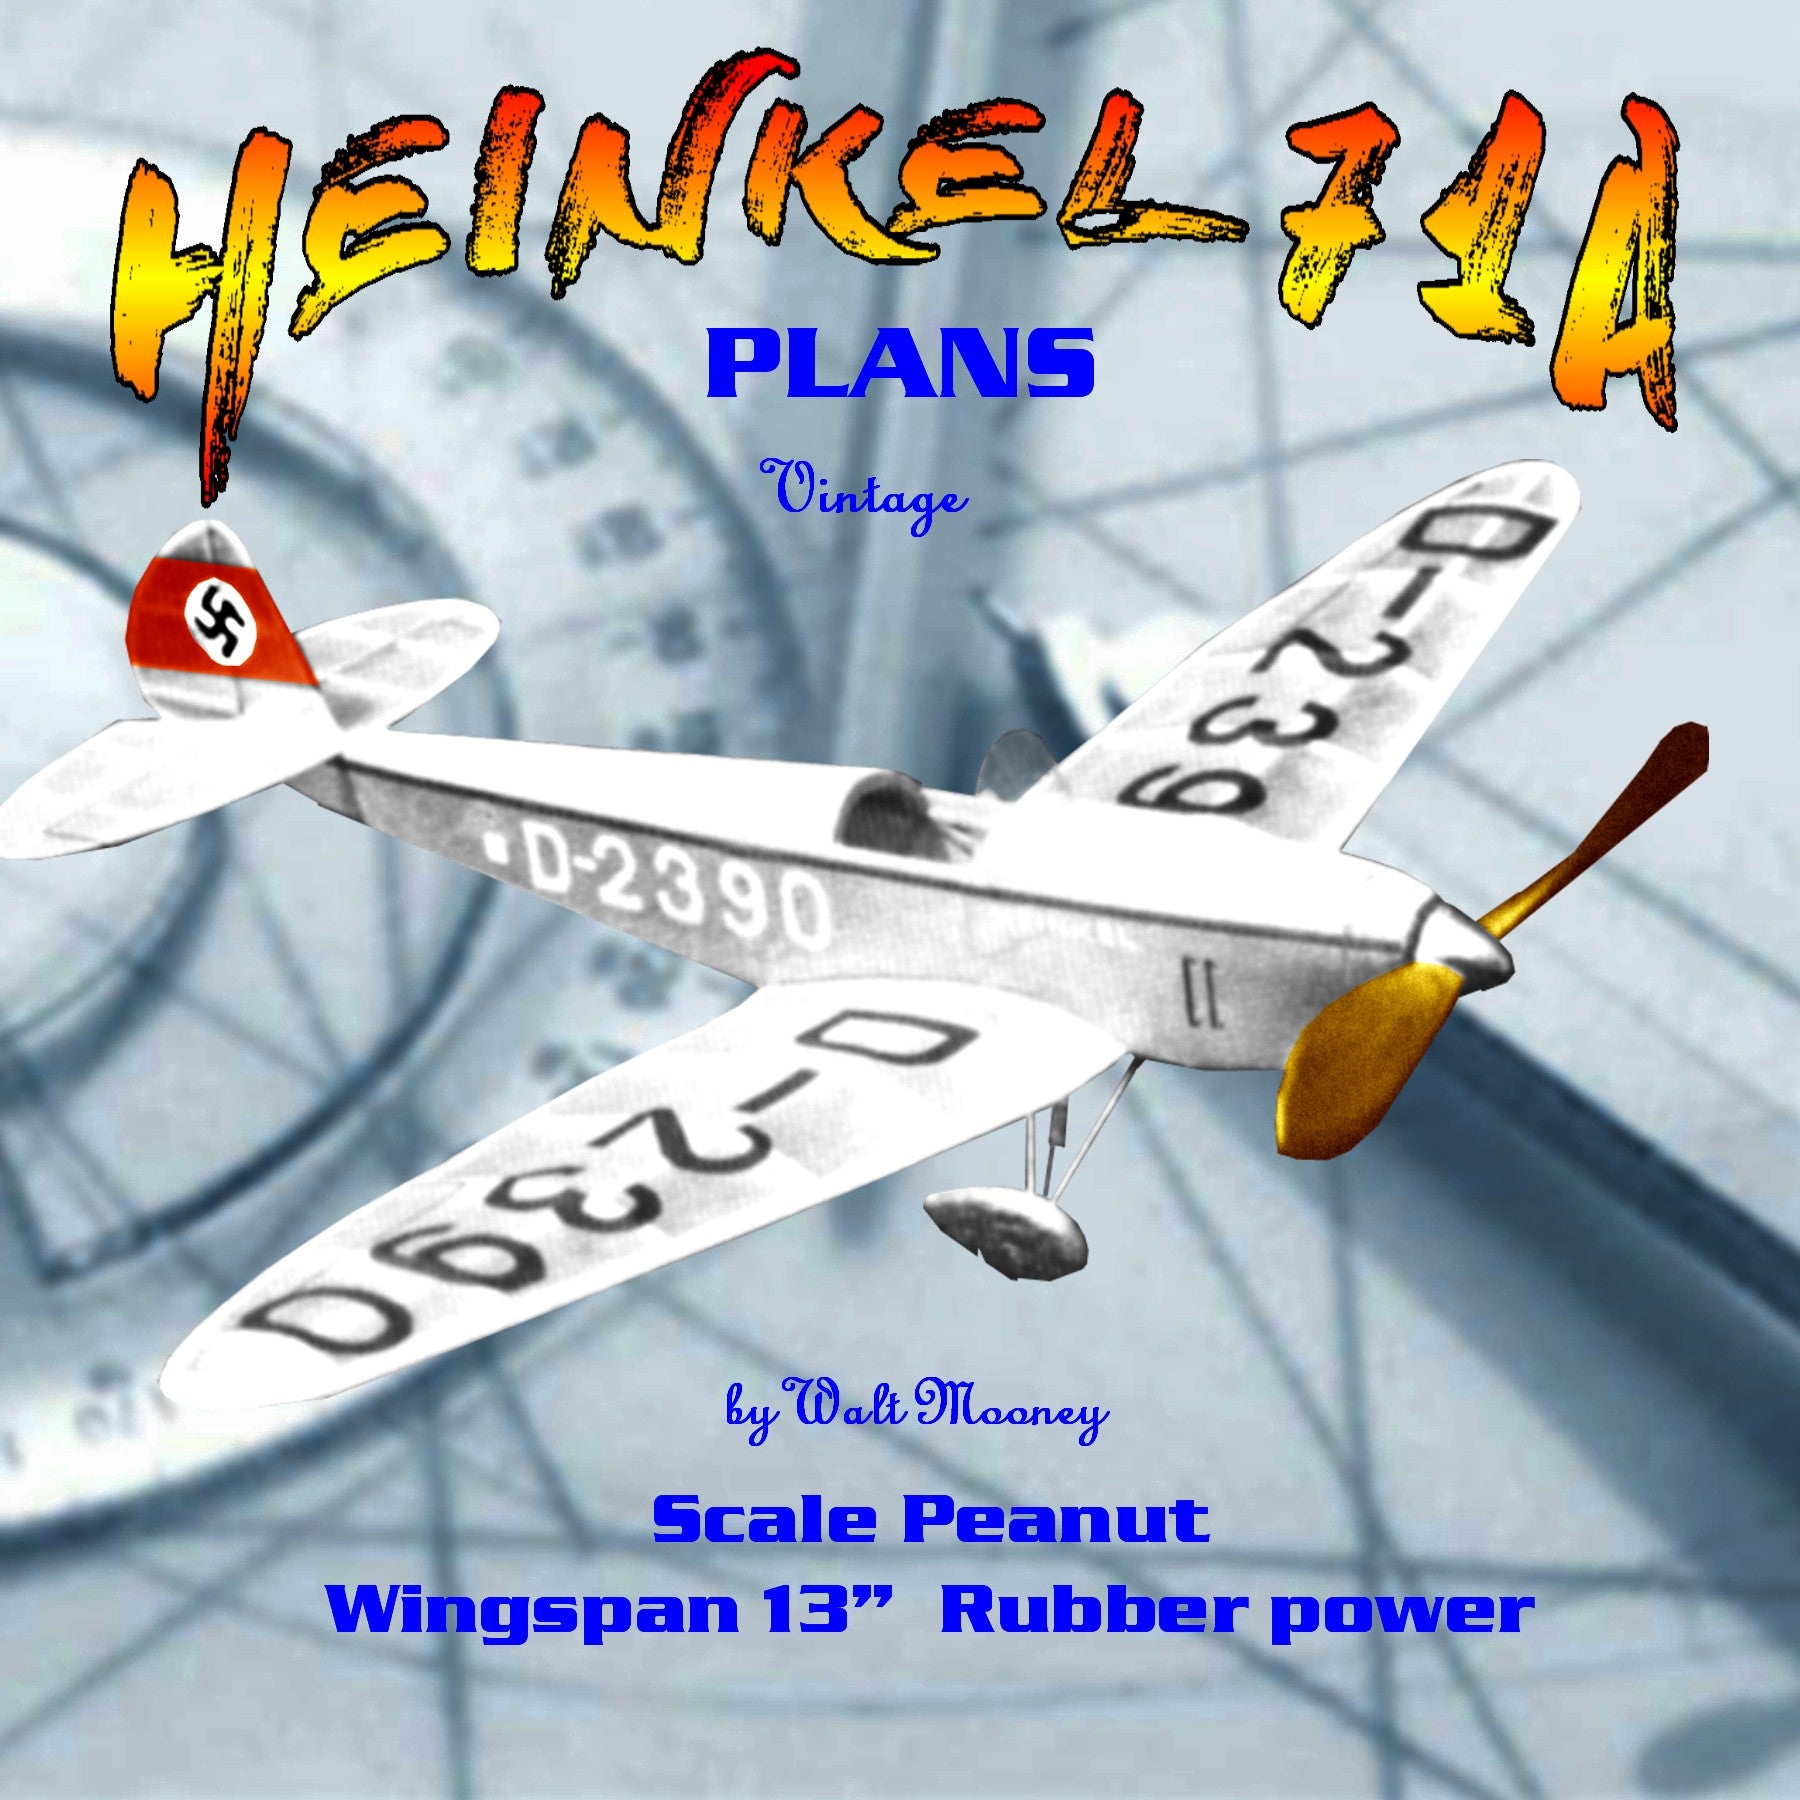 full size printed plans peanut scale  “heinkel 71a” classic german tail dragger from the 30s